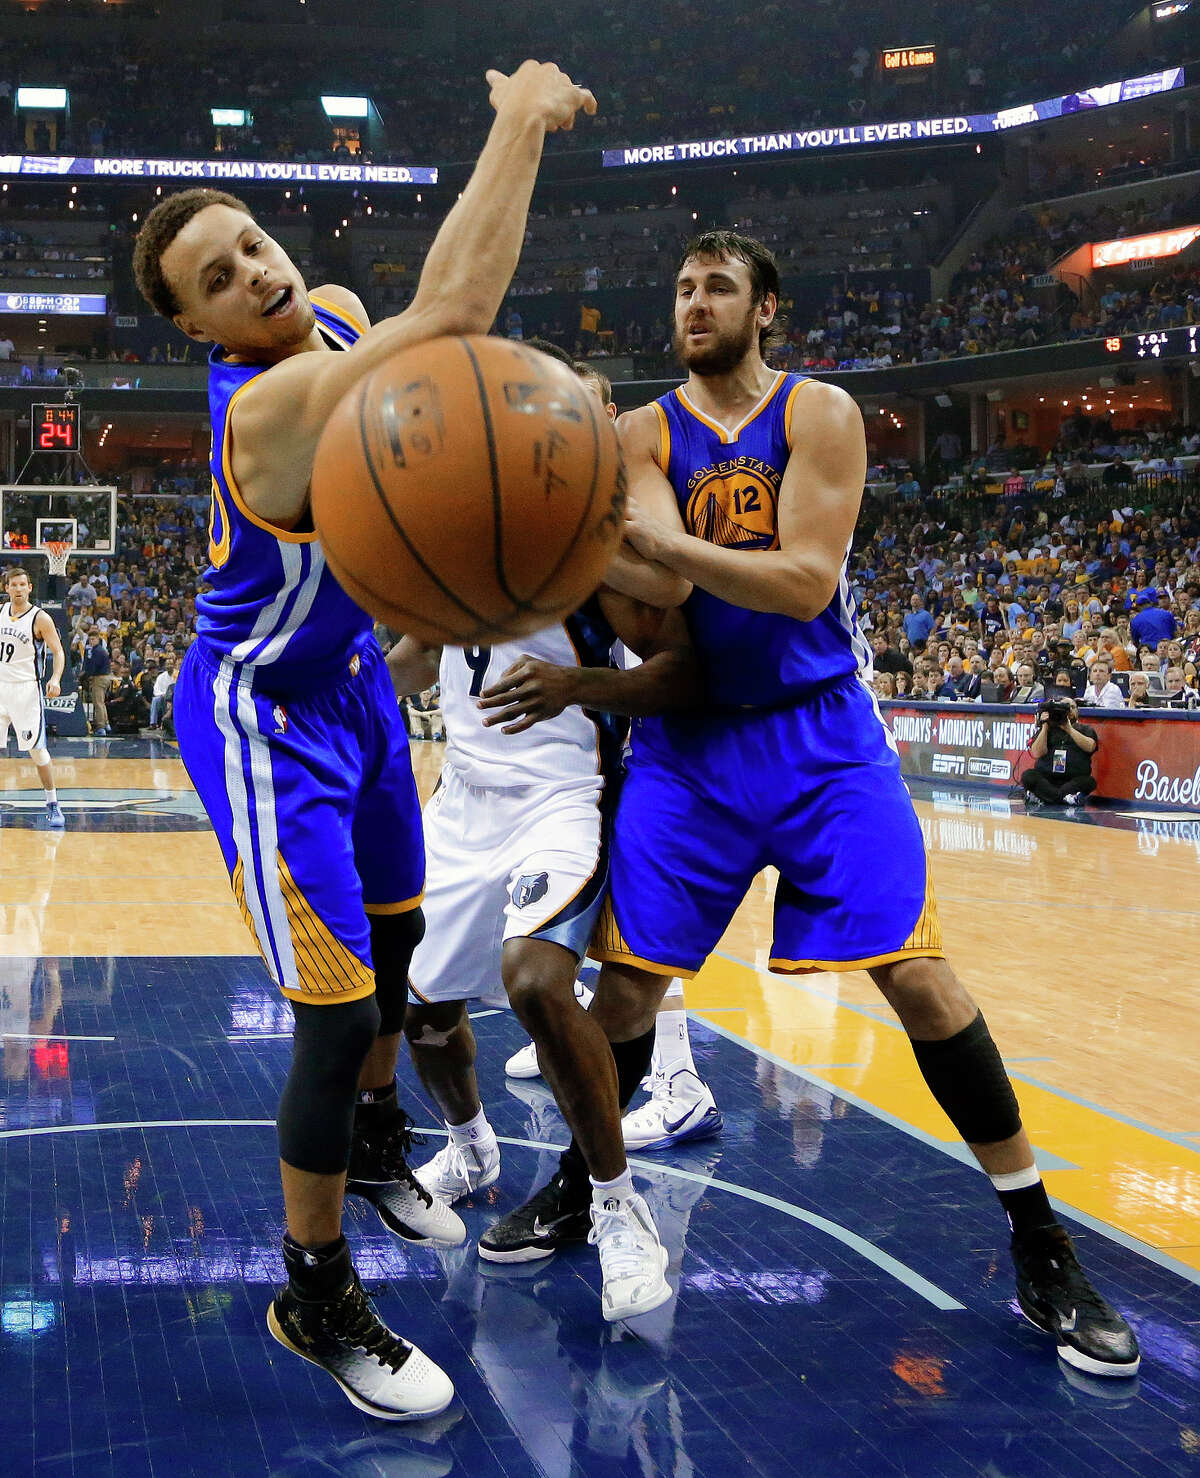 Stephen Curry, who scored 23 points, loses the ball out of bounds during the first half.